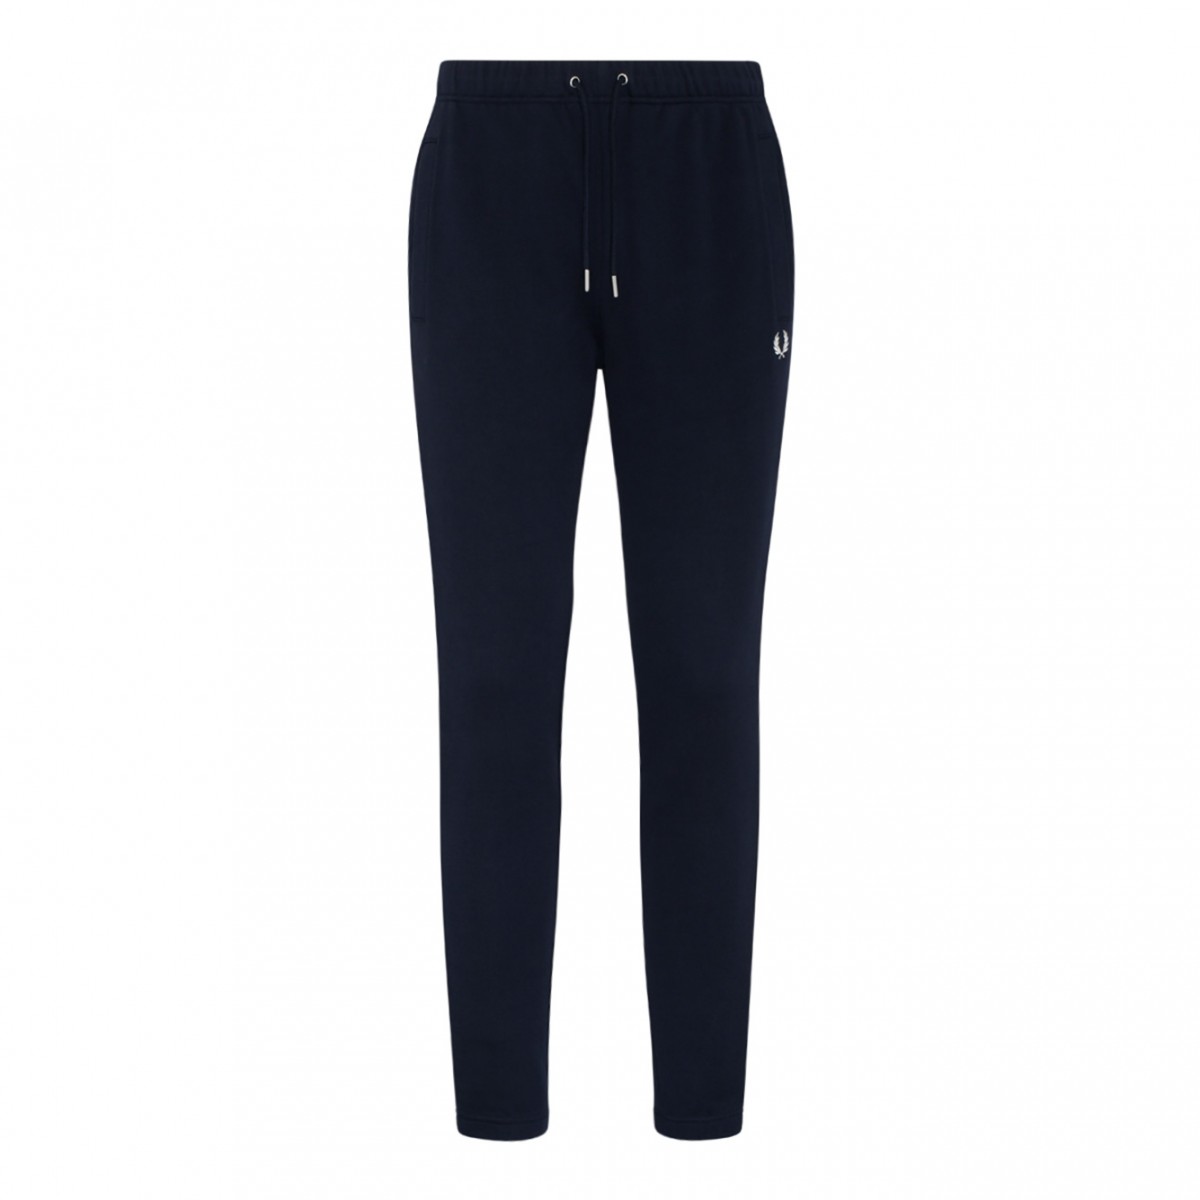 Fred Perry Navy Cotton Trousers.